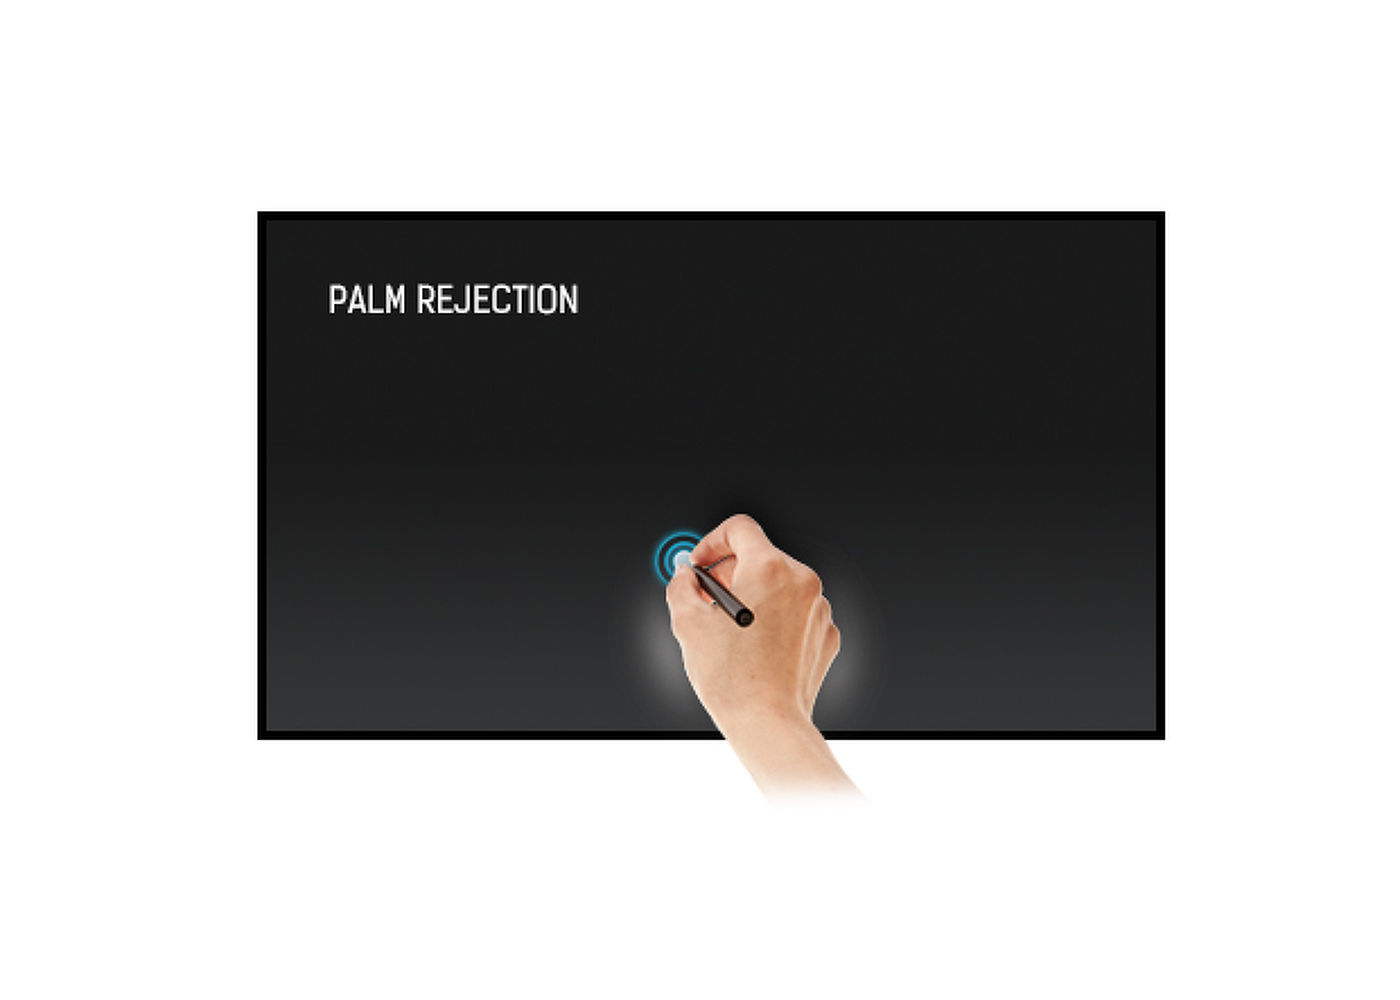 PALM REJECTION FUNCTION